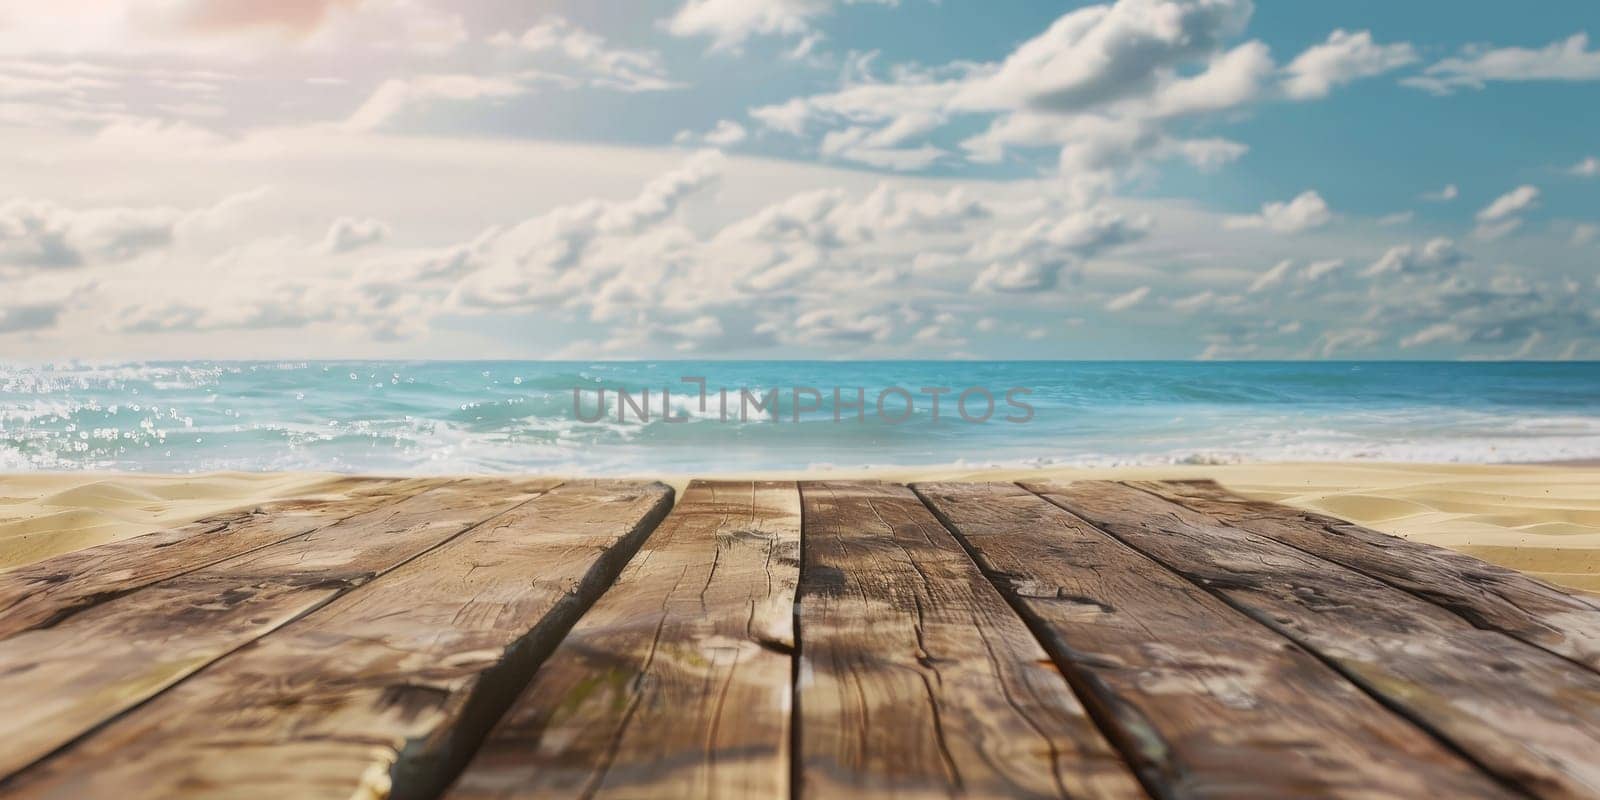 A wooden board with the ocean in the background